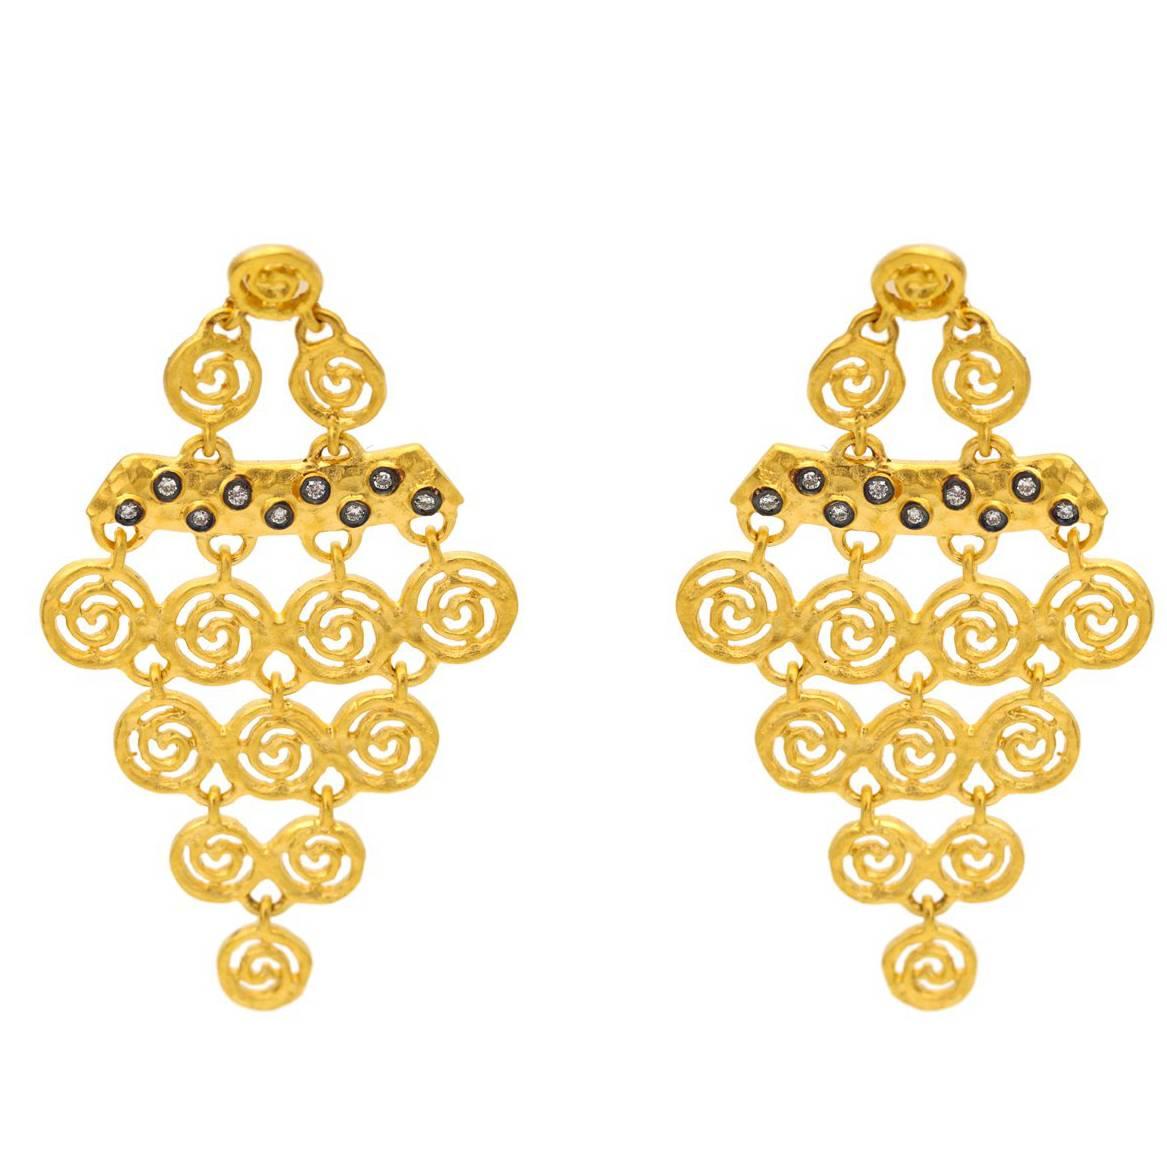 Gold Vermiel Spiral and Diamond Earrings with Post Backs